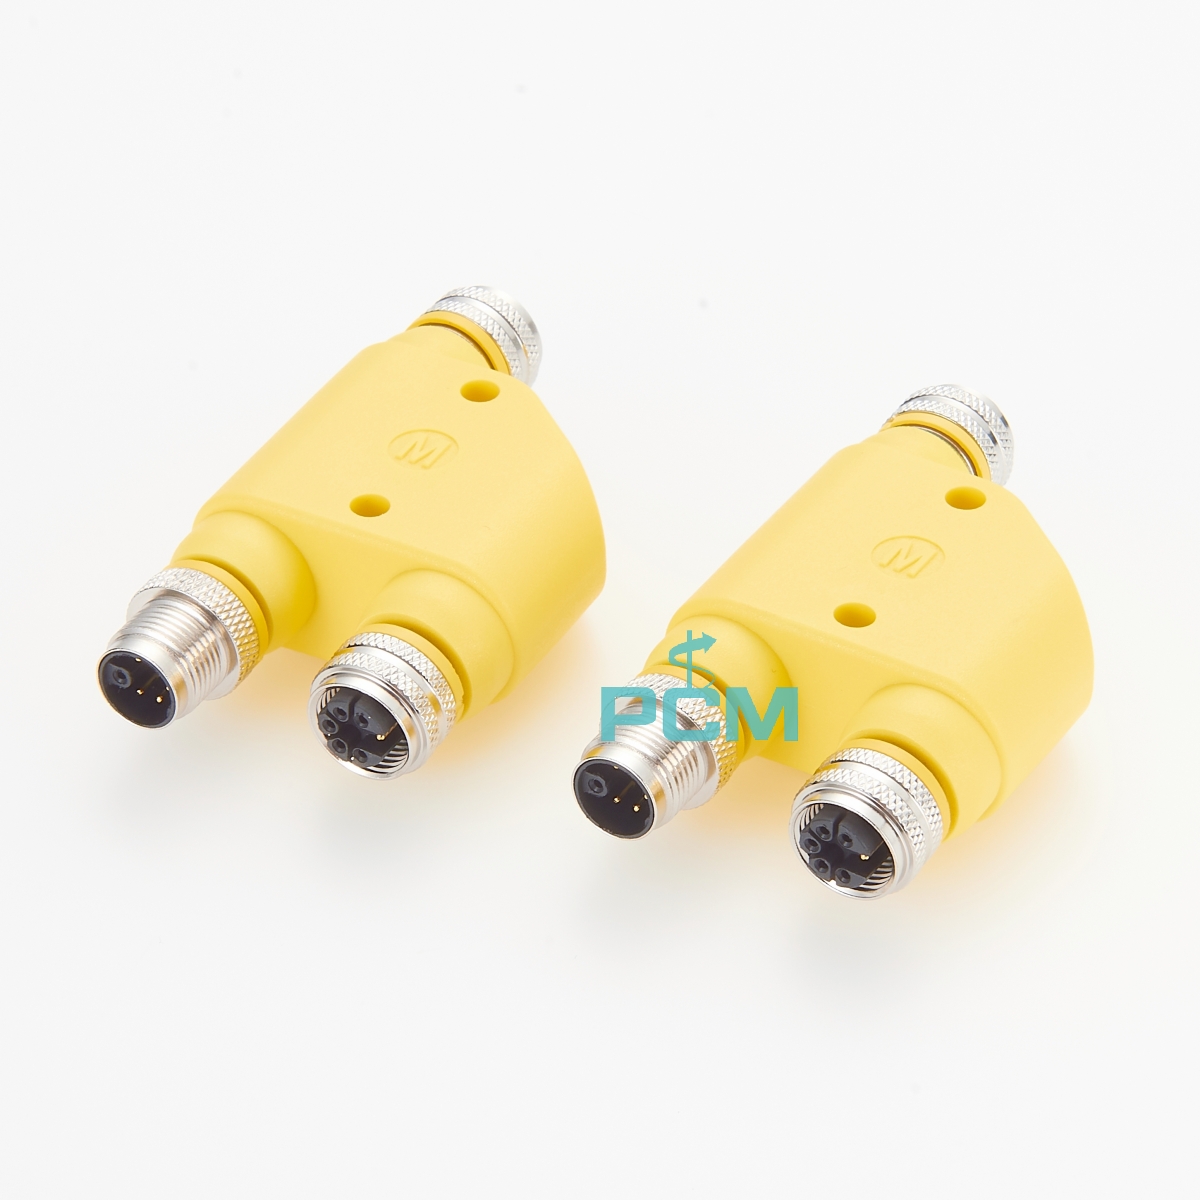 M12 Power Cable M-code 2-Way Splitter h-junction